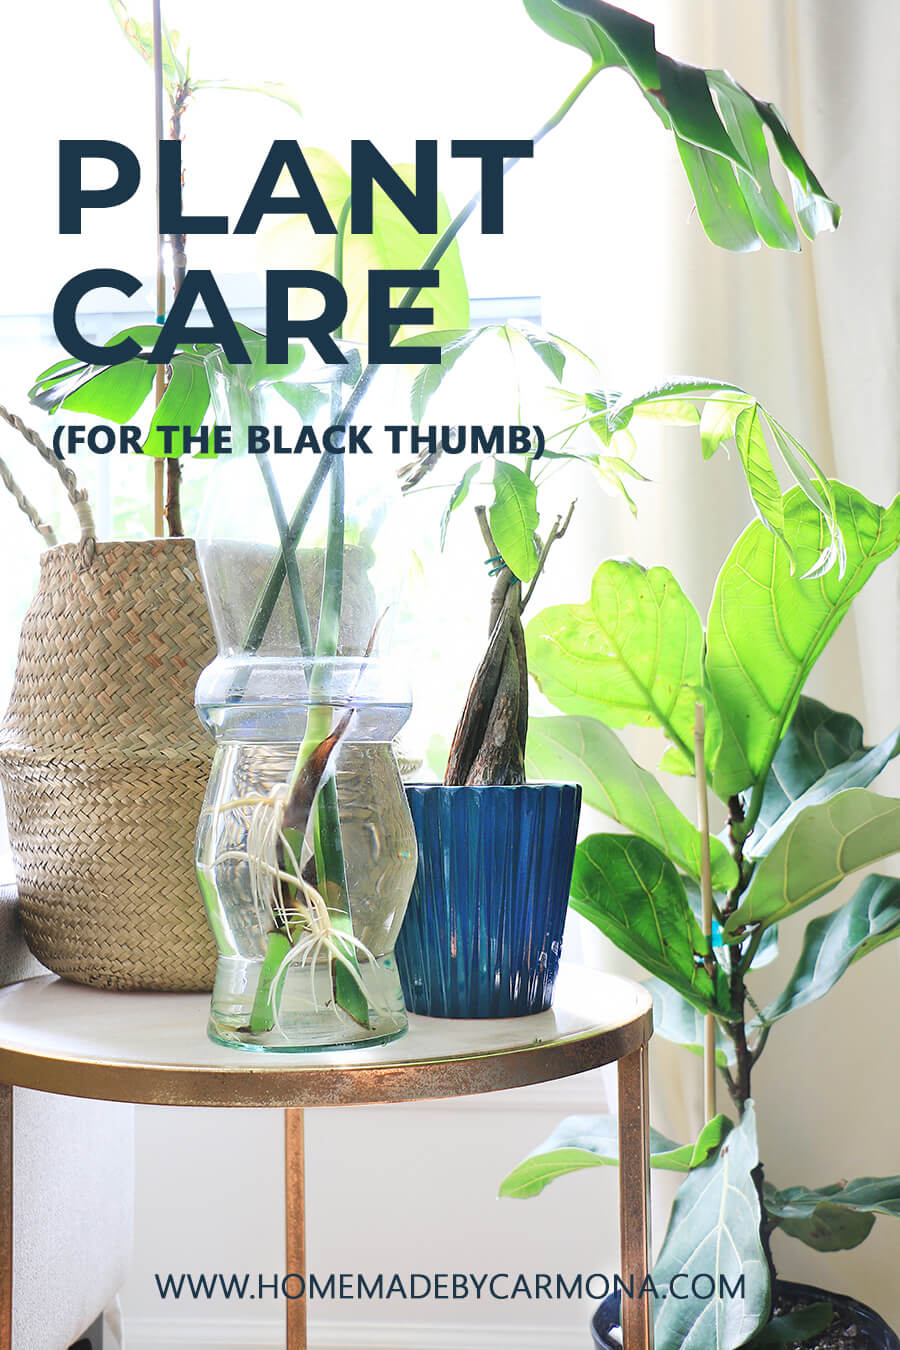 Houseplants-cared-for-in-jar